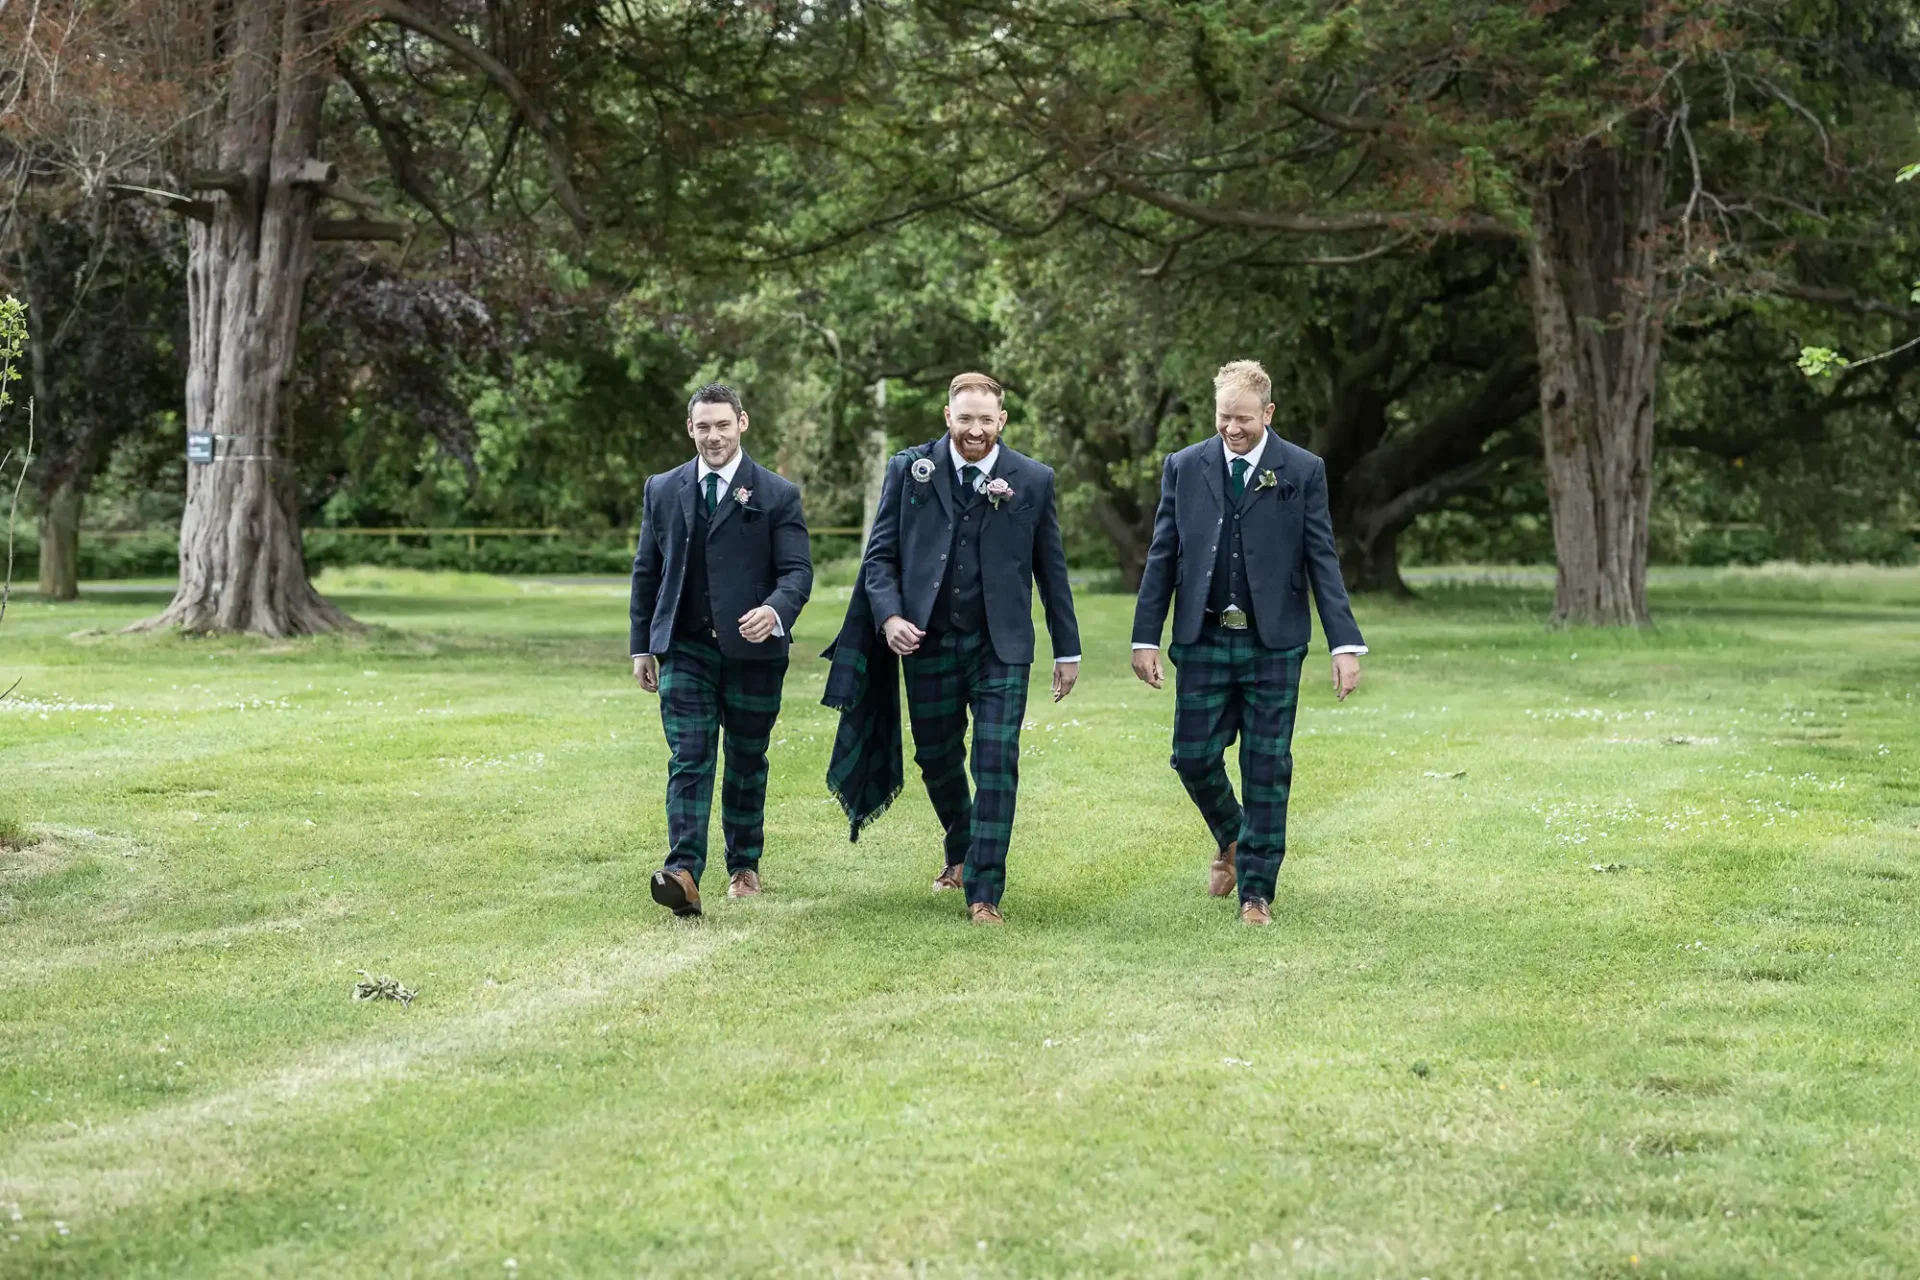 Three men in suits and tartan kilts walking joyfully through a grassy park with trees in the background.